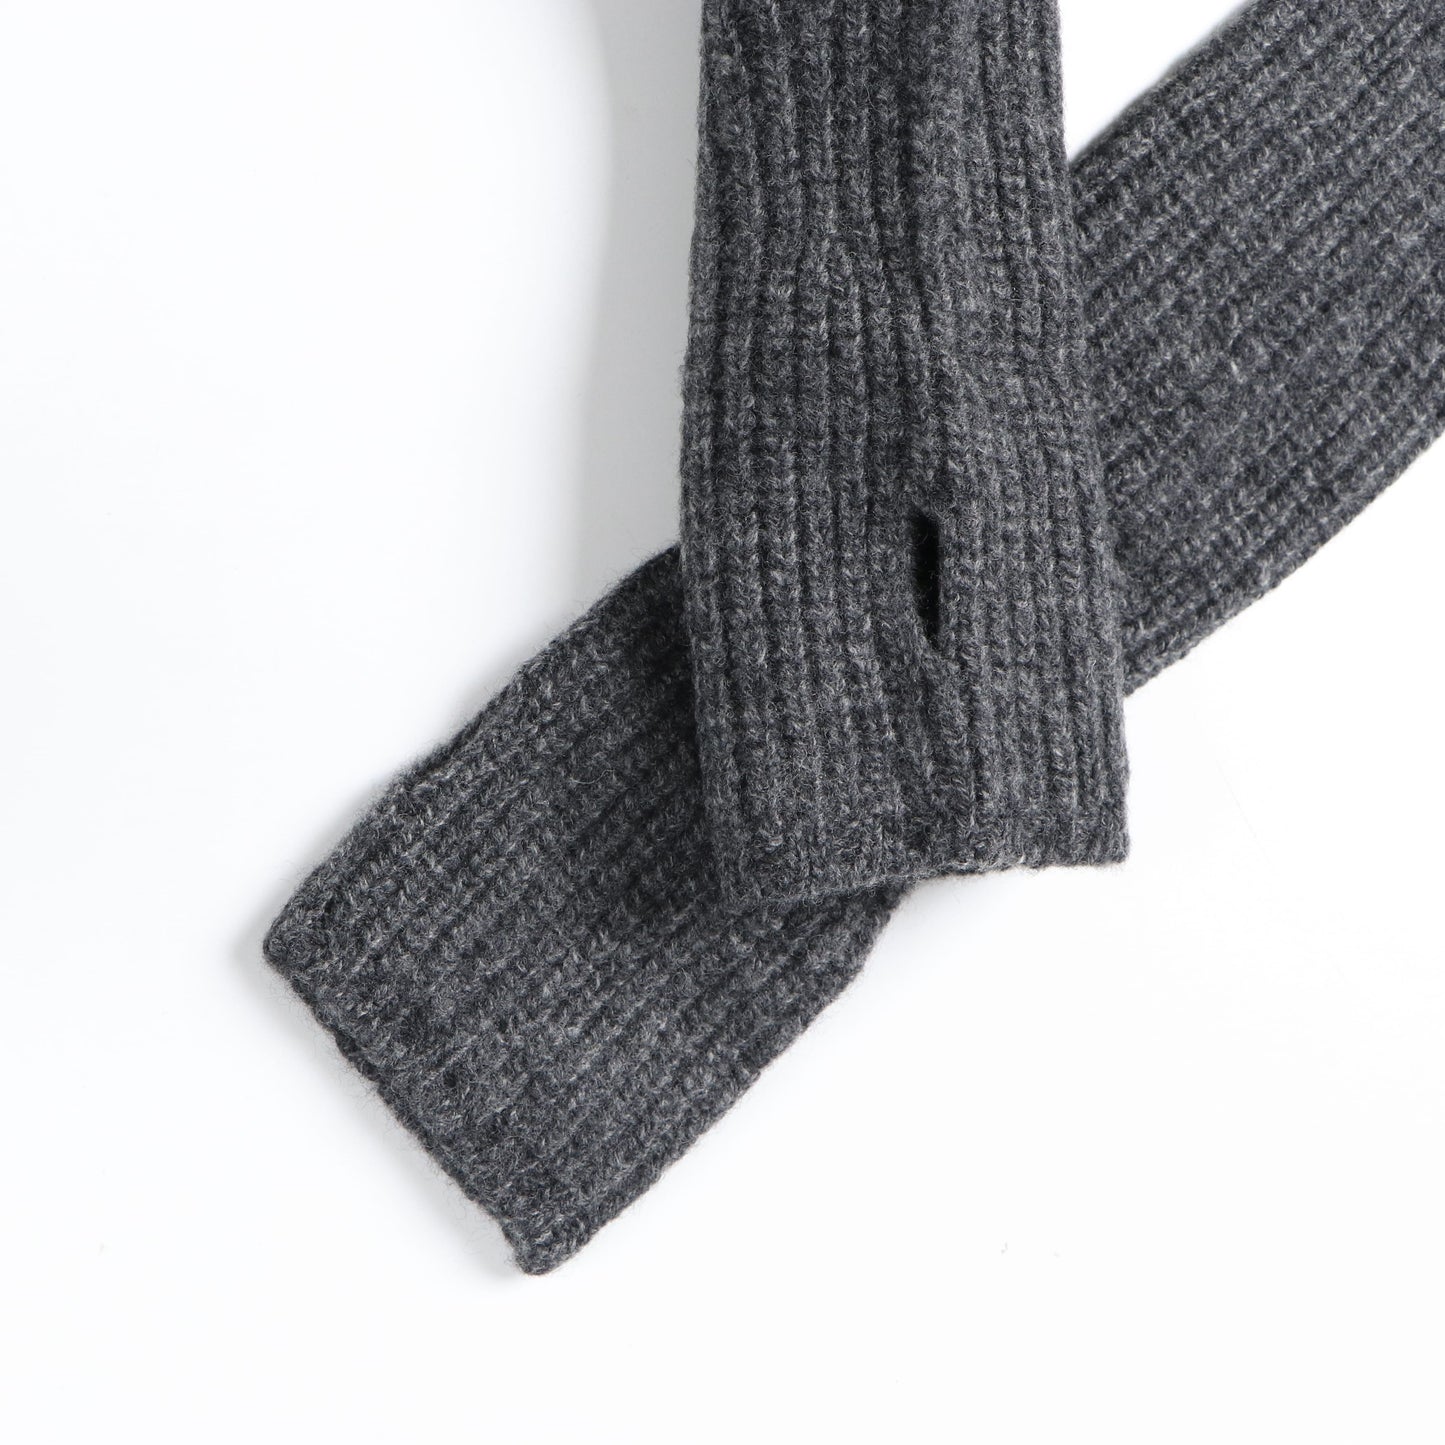 superfine lambs wool ribbed-knit fingerless gloves